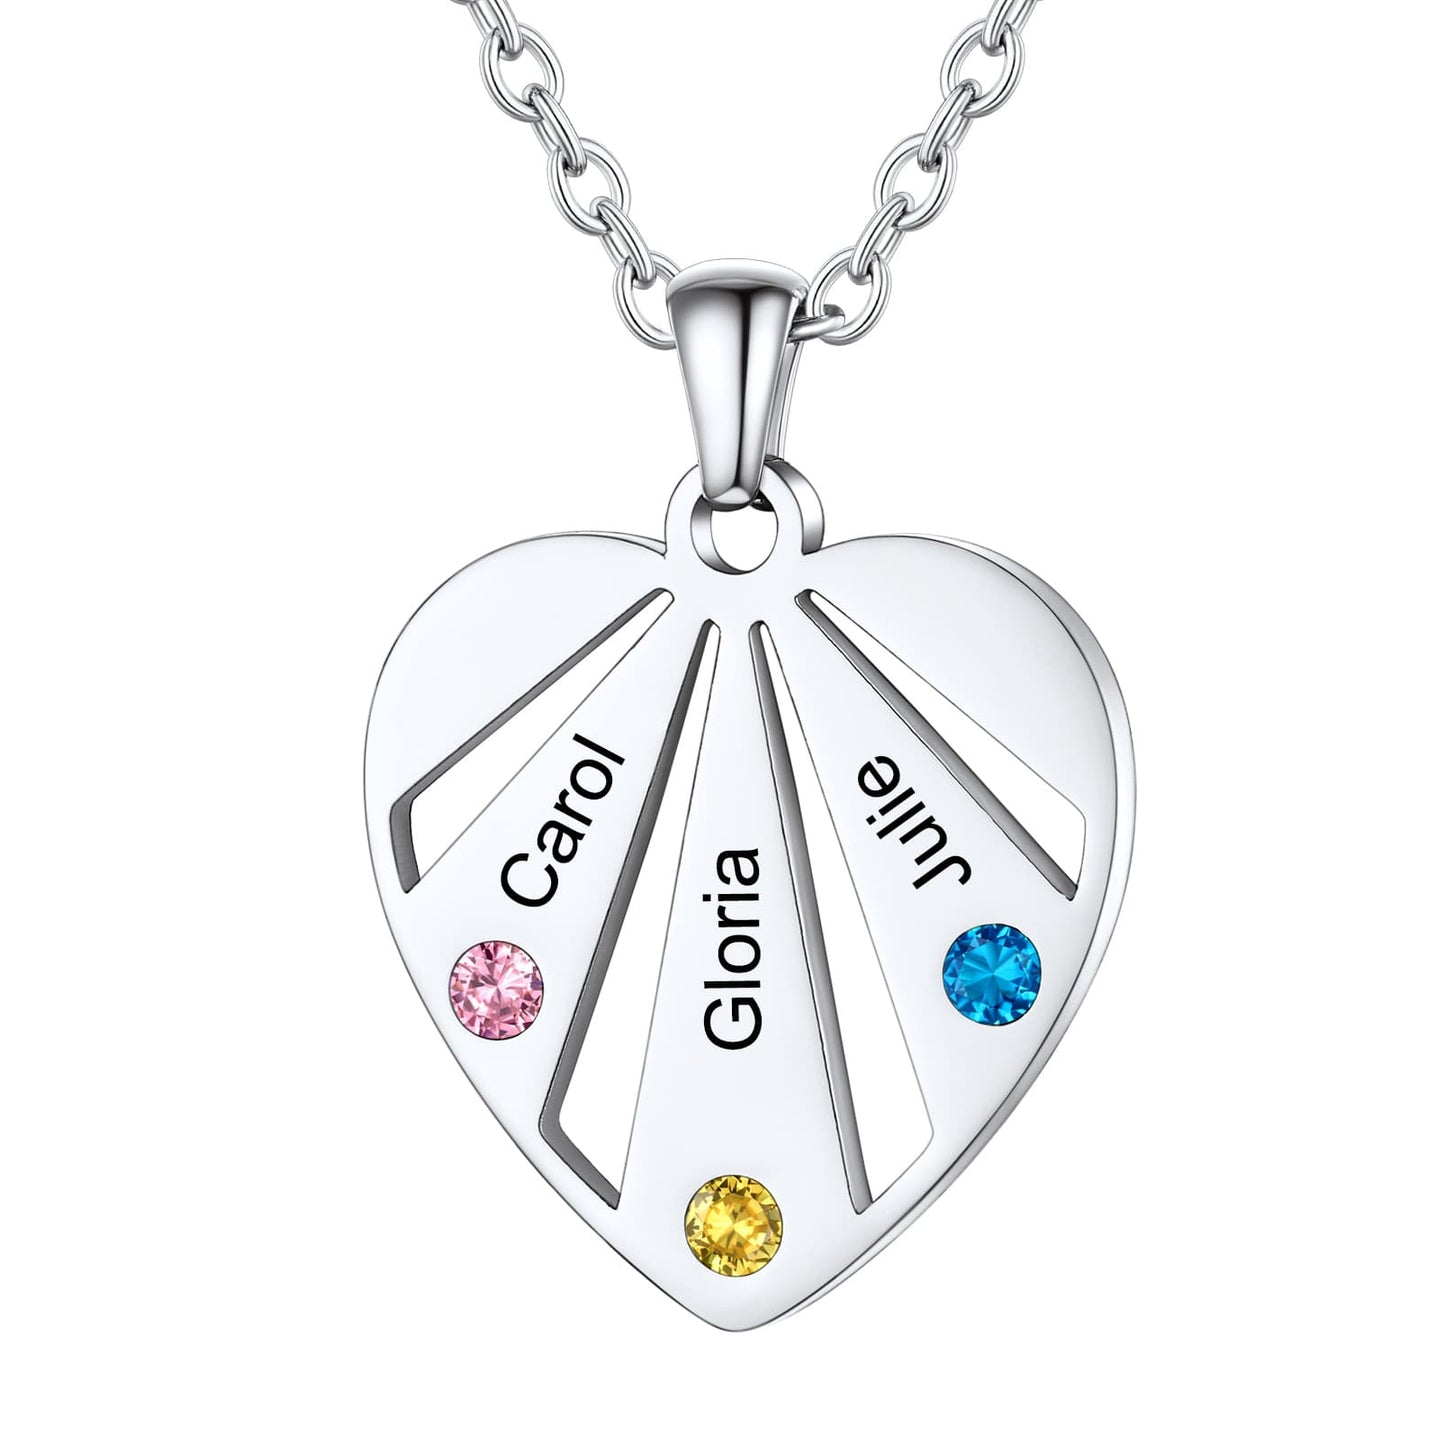 Personalized Engraved Heart Birthstone Necklace 3 stones silver